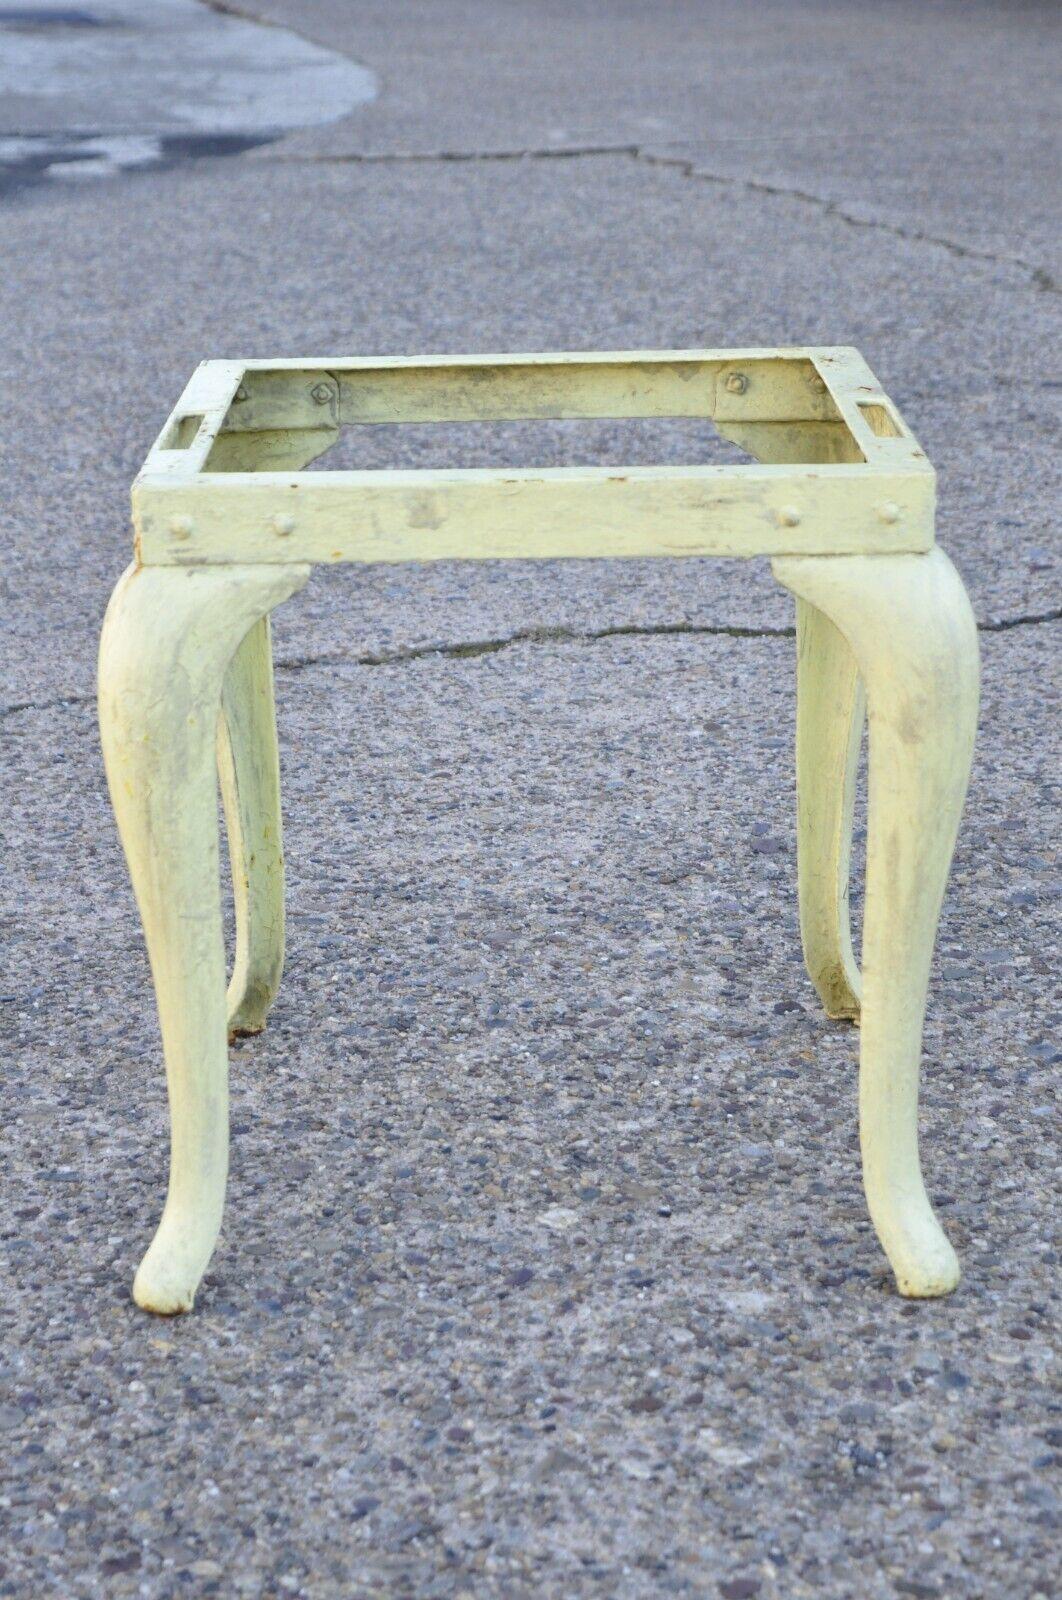 Antique Cast Metal Art Deco Cabriole Leg Yellow Side End Table. Item features a cast metal frame, yellow distress painted finish, cabriole legs, quality American craftsmanship. Circa Early 20th Century.
Measurements: 
22